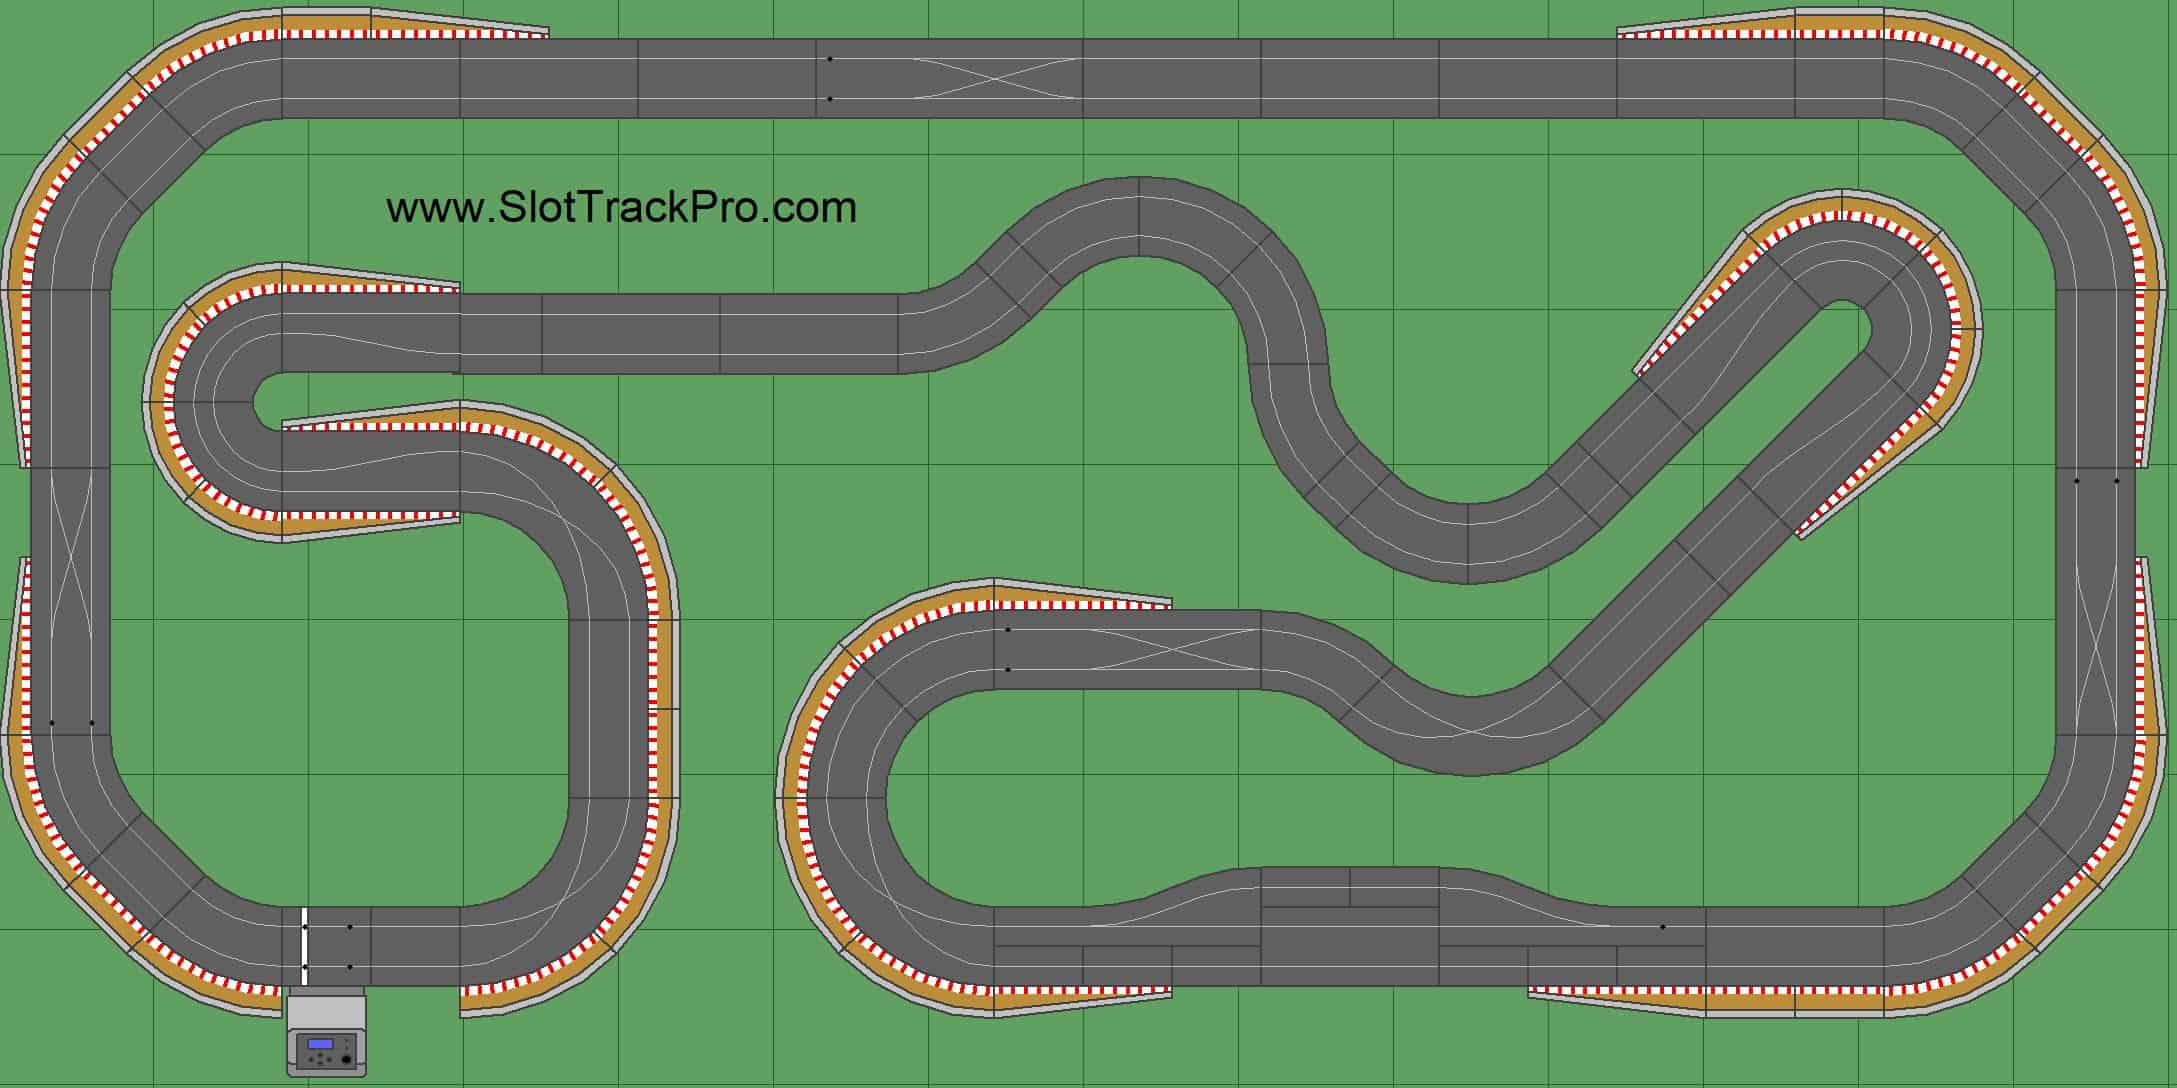 Scalextric Track Designs - Free PDF Track Plans at Slot Track Pro